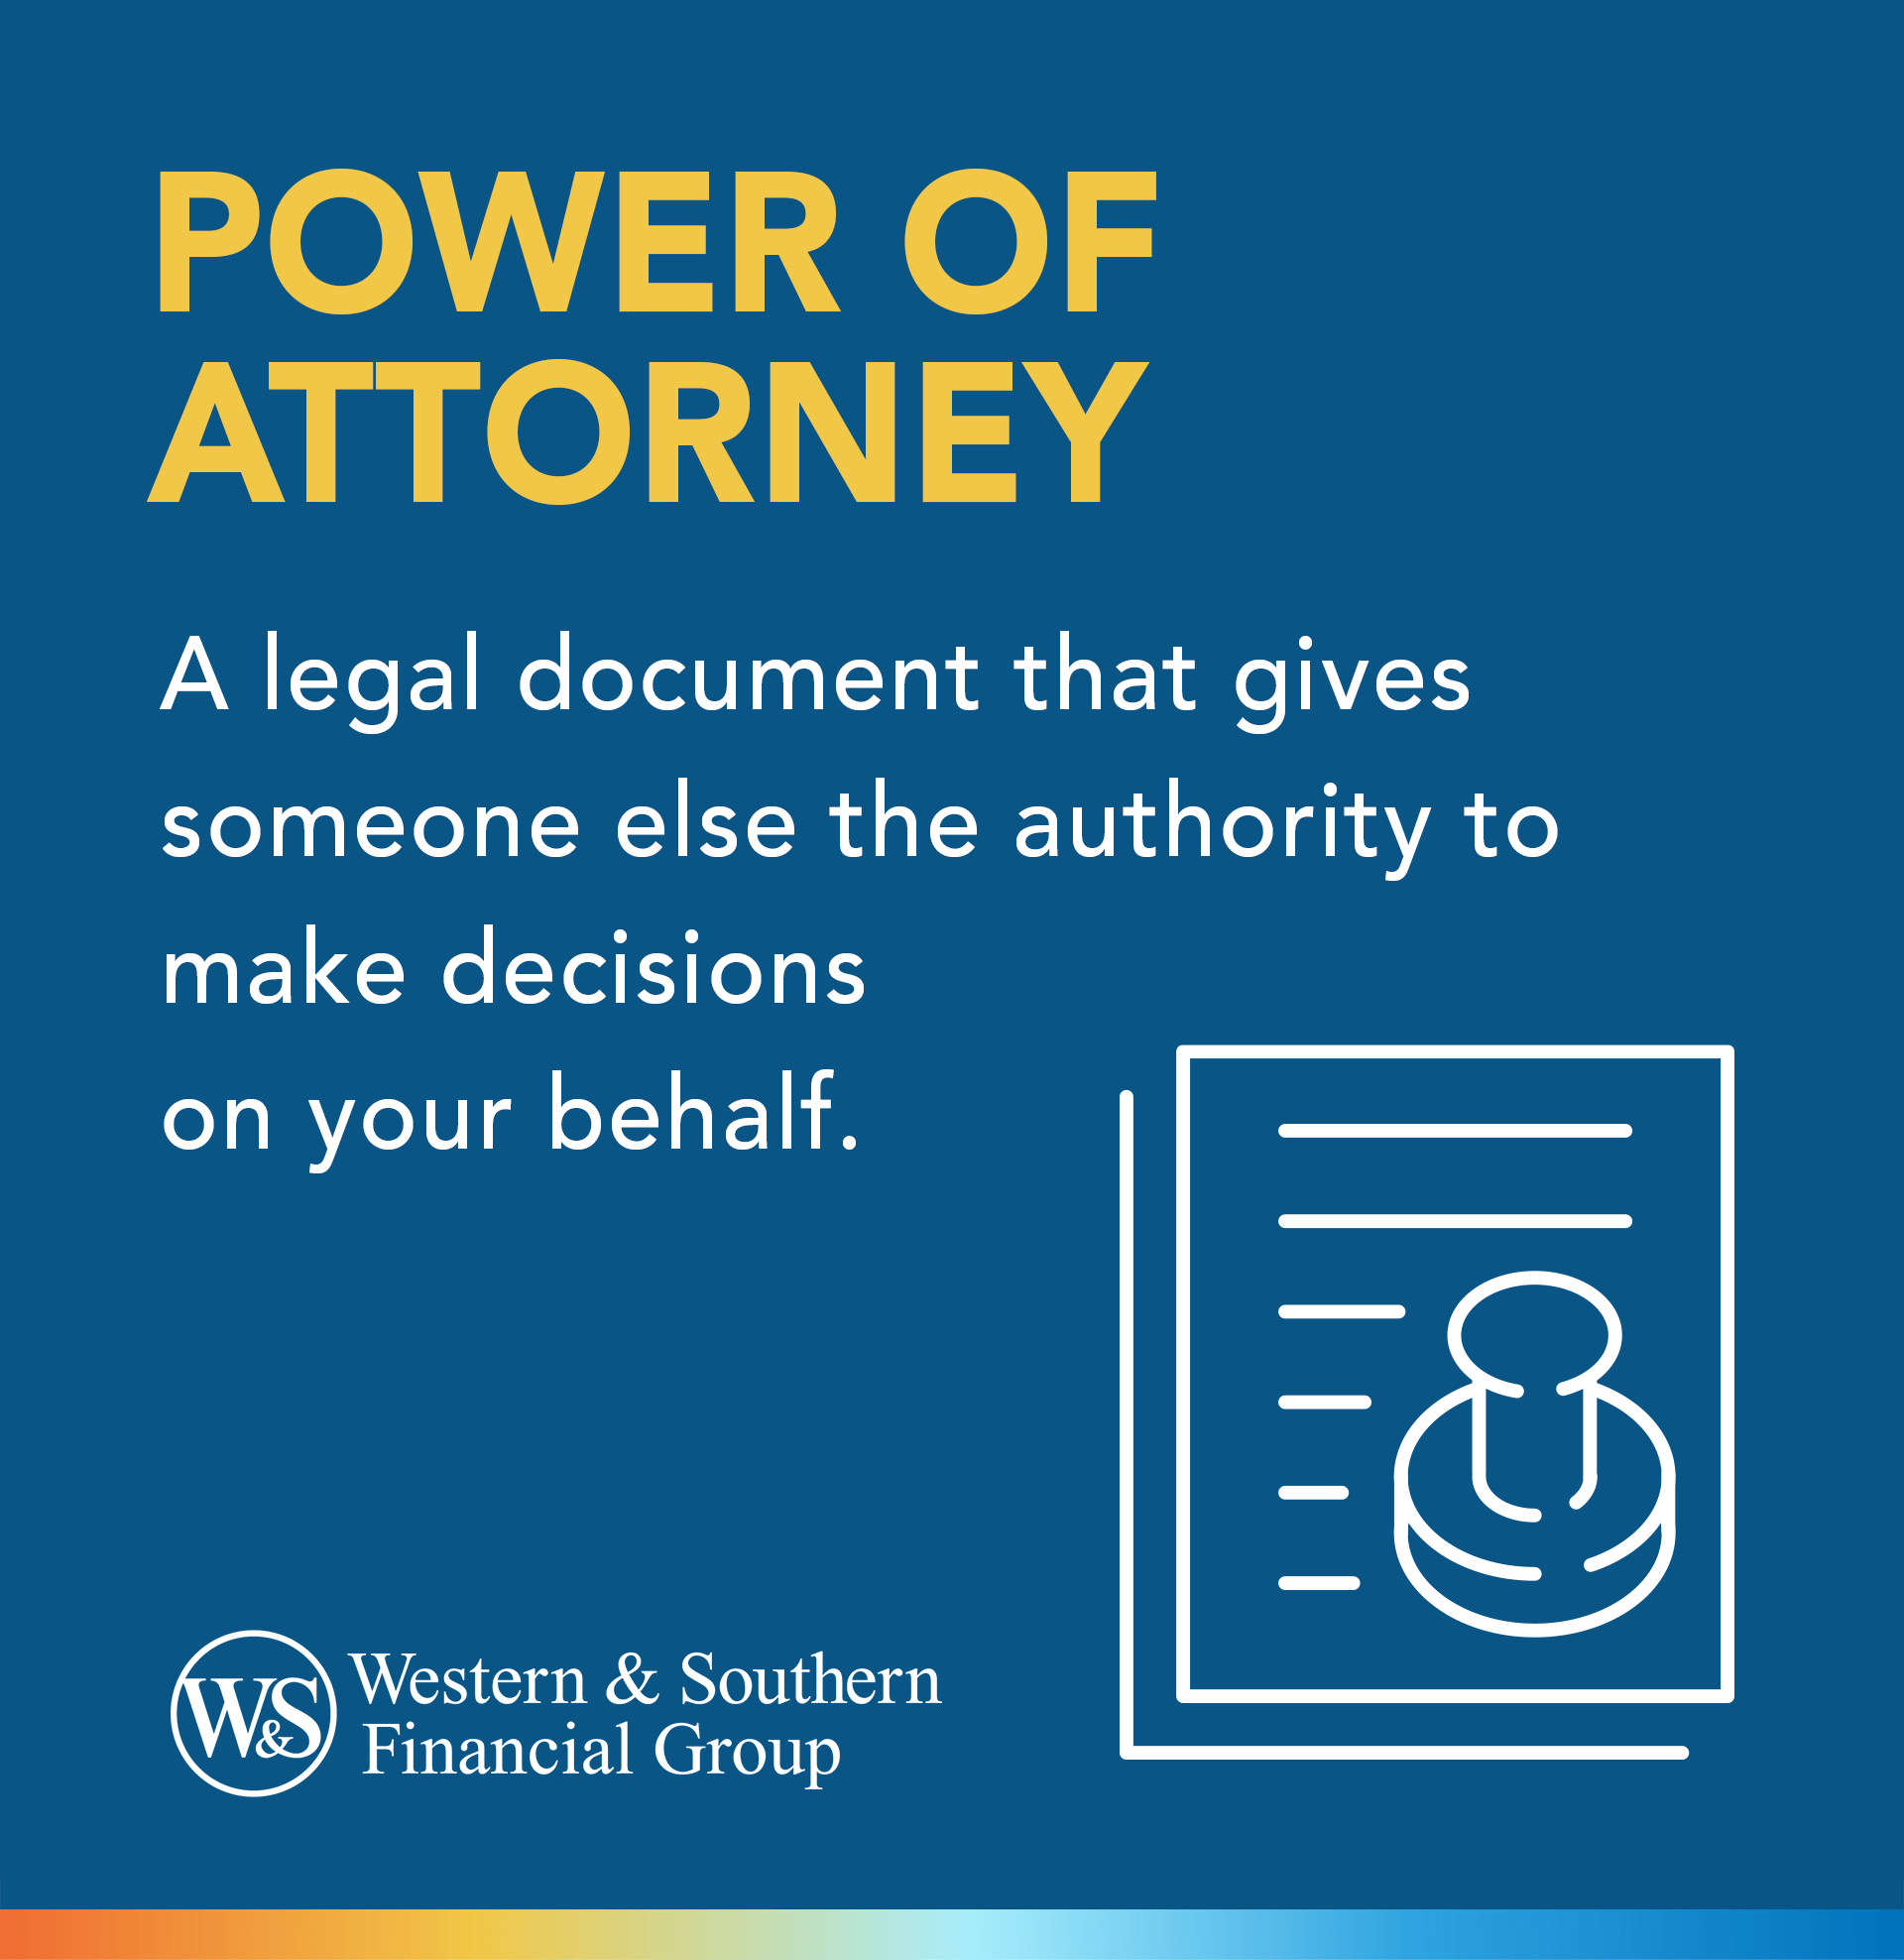 Power of Attorney Definition